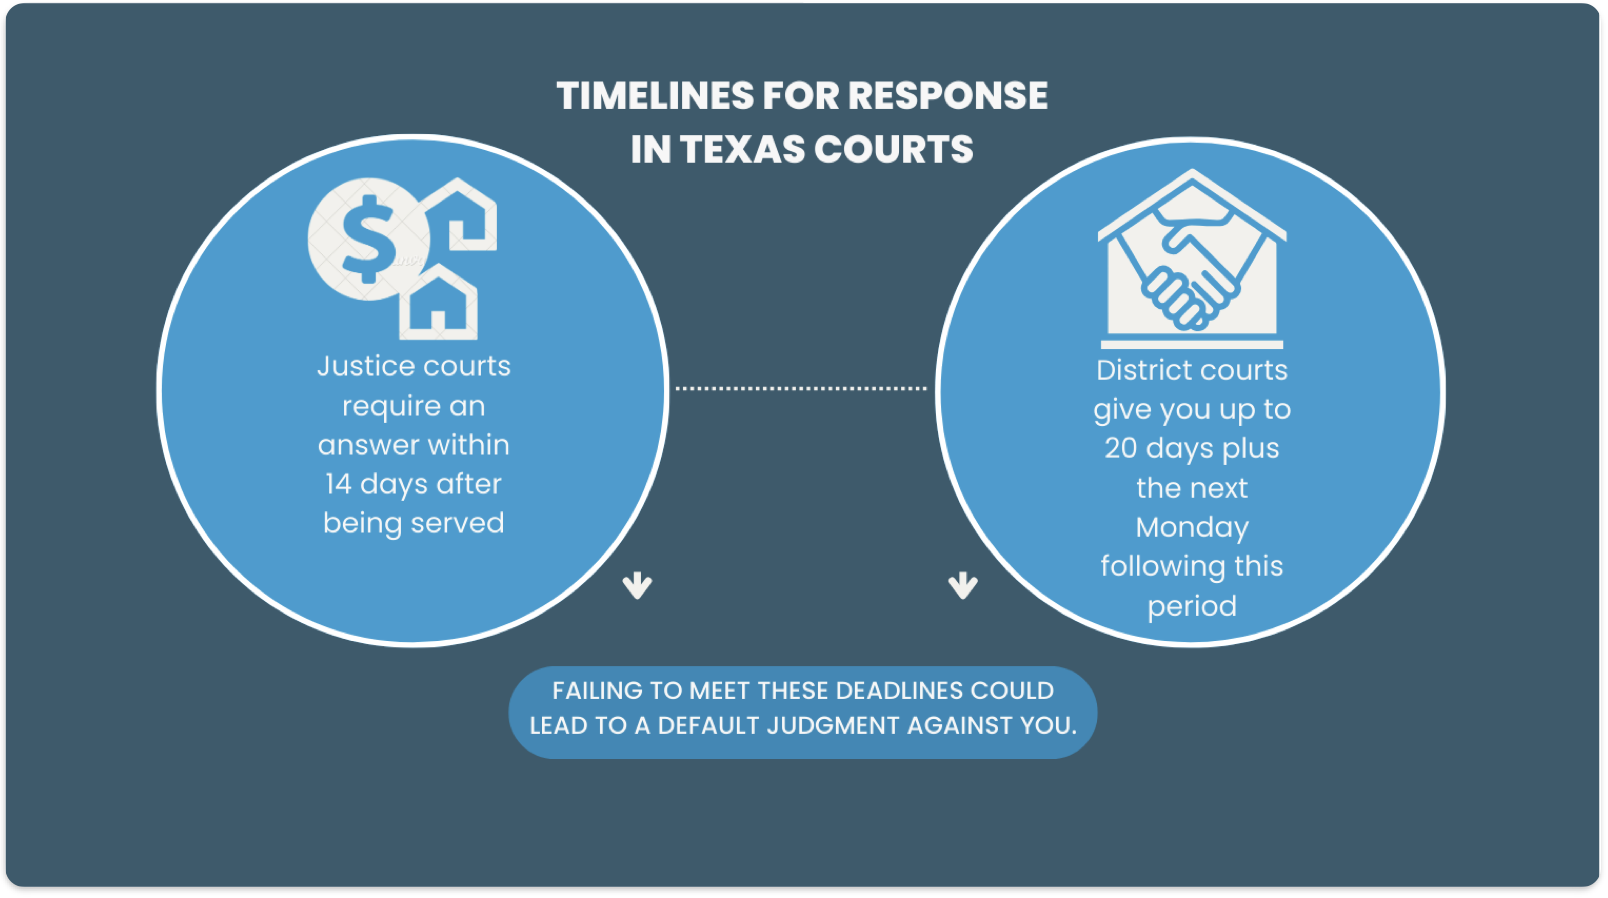 Infographic showing response timelines in Texas courts for debt collection cases: 14 days for justice courts and 20 days plus the next Monday for district courts, with a warning about default judgments.